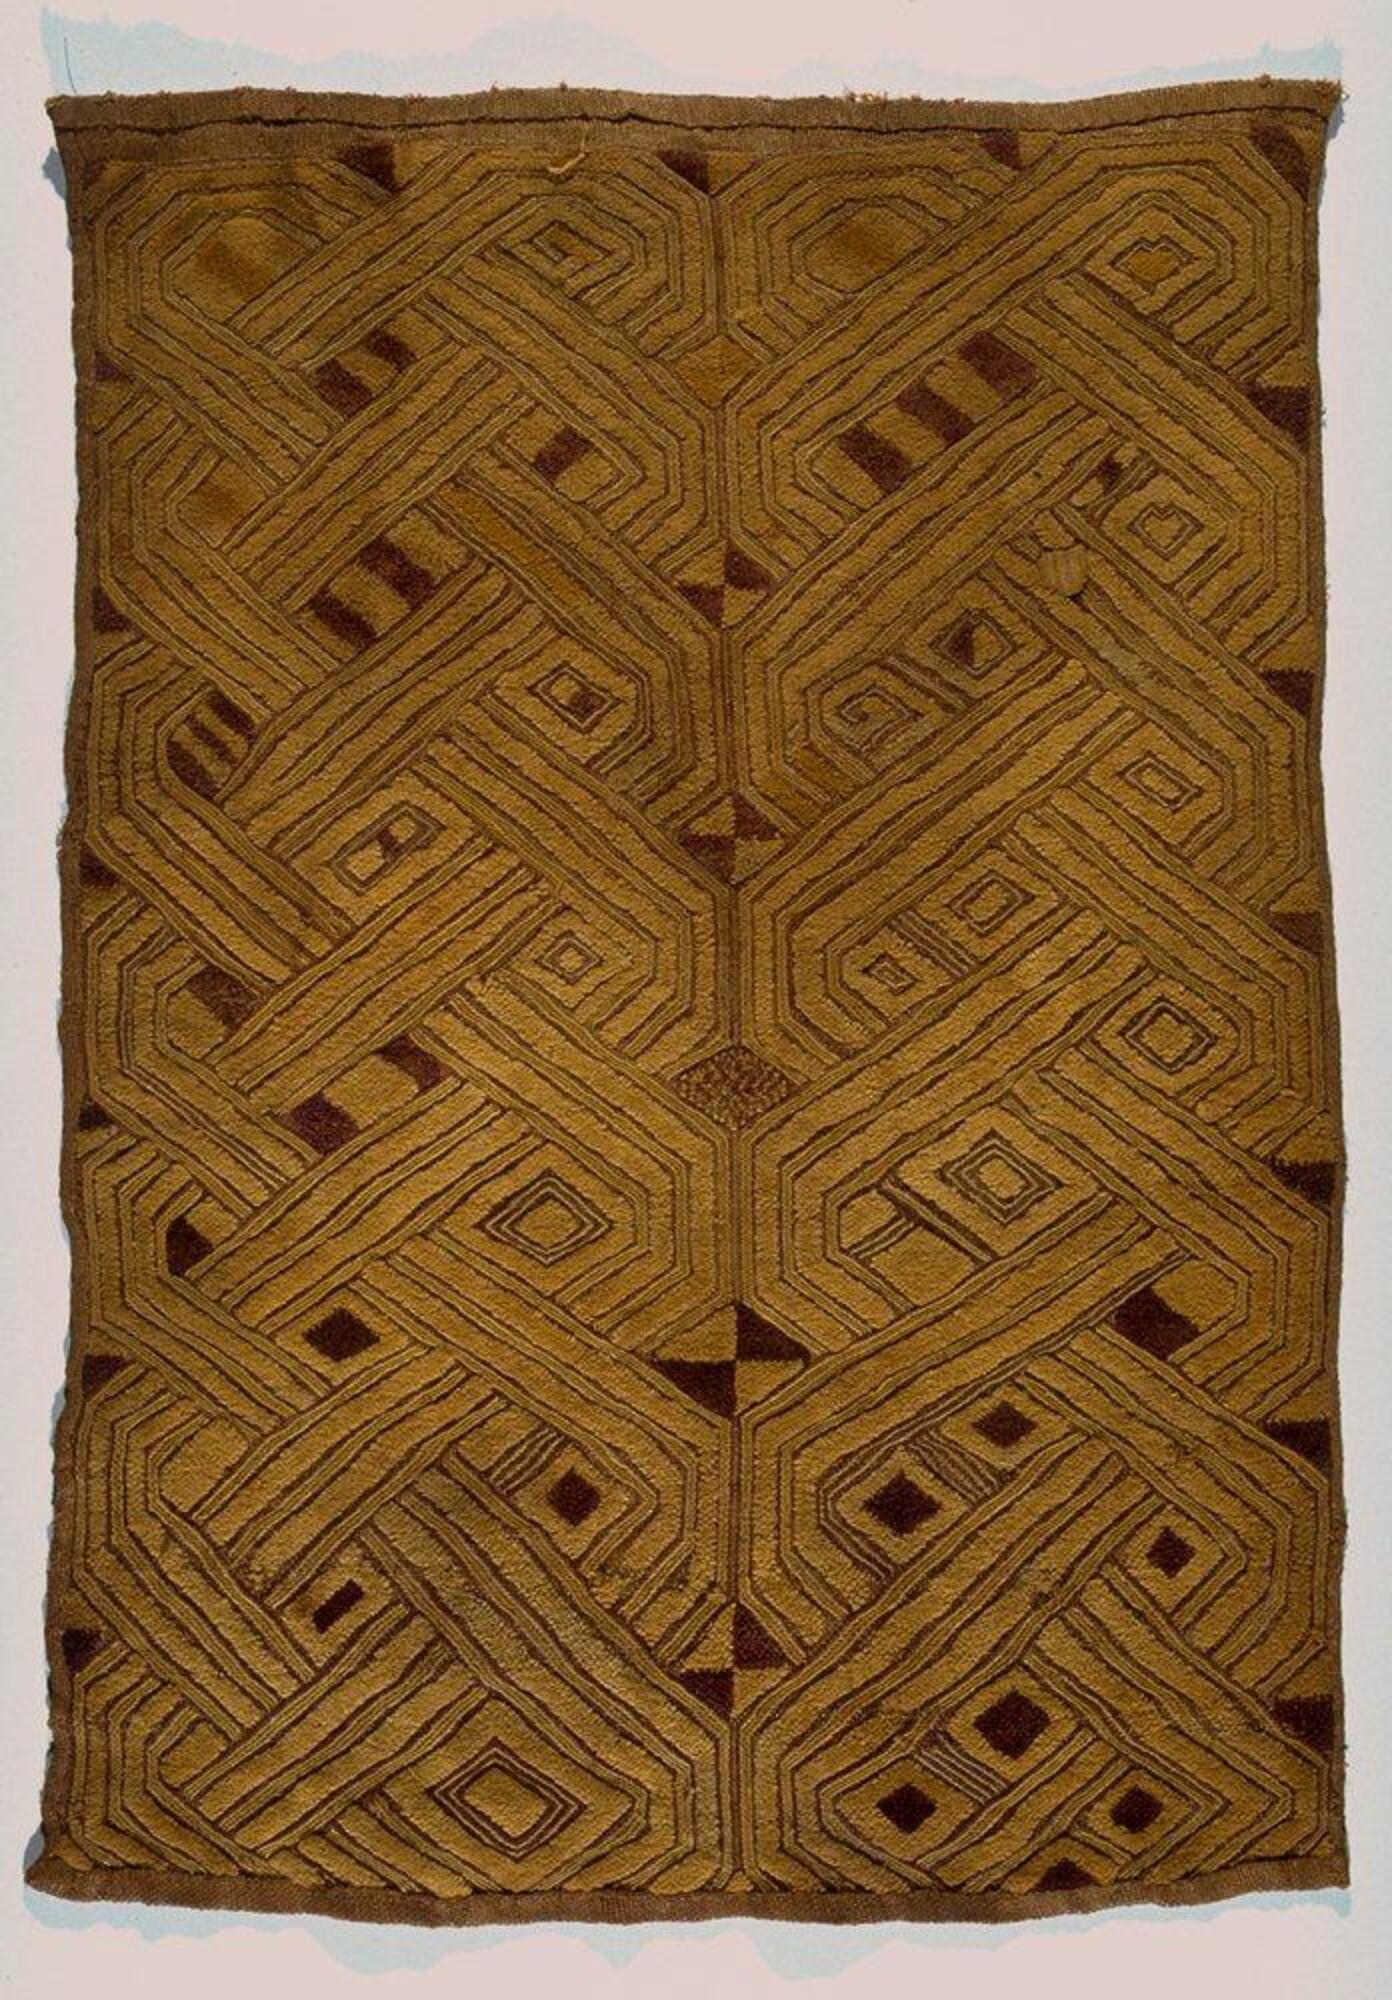 Rectangular panel with hemmed edges. There are two rows of patterns running down the panel consisting of multiple interlocking lines.